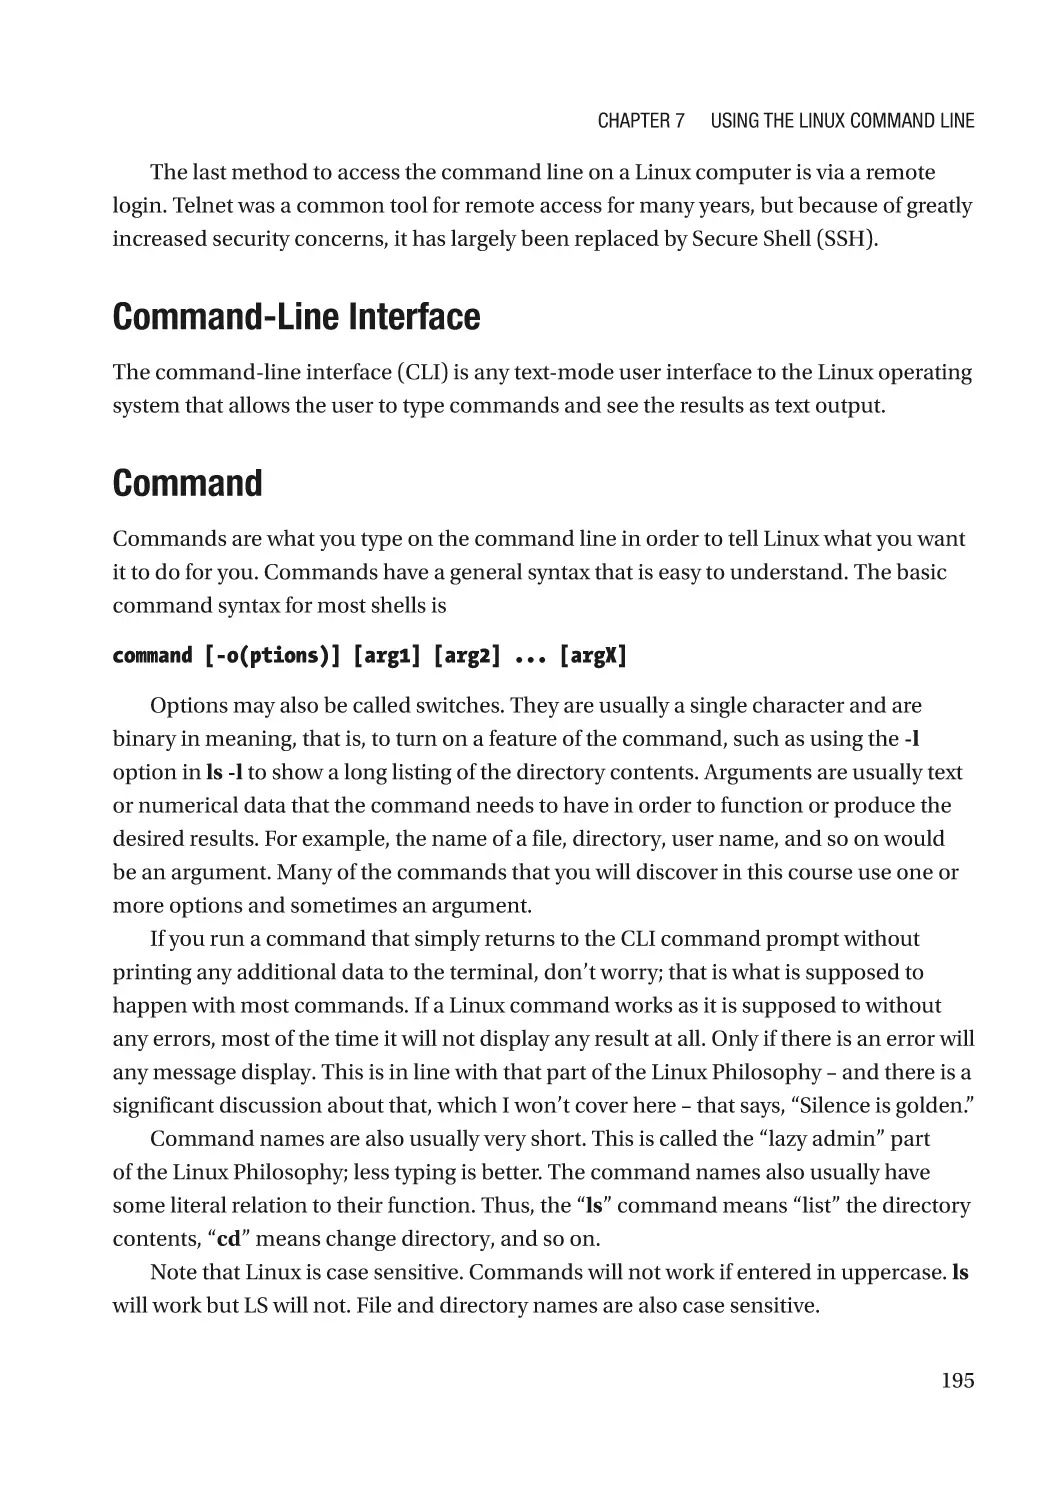 Command-Line Interface
Command